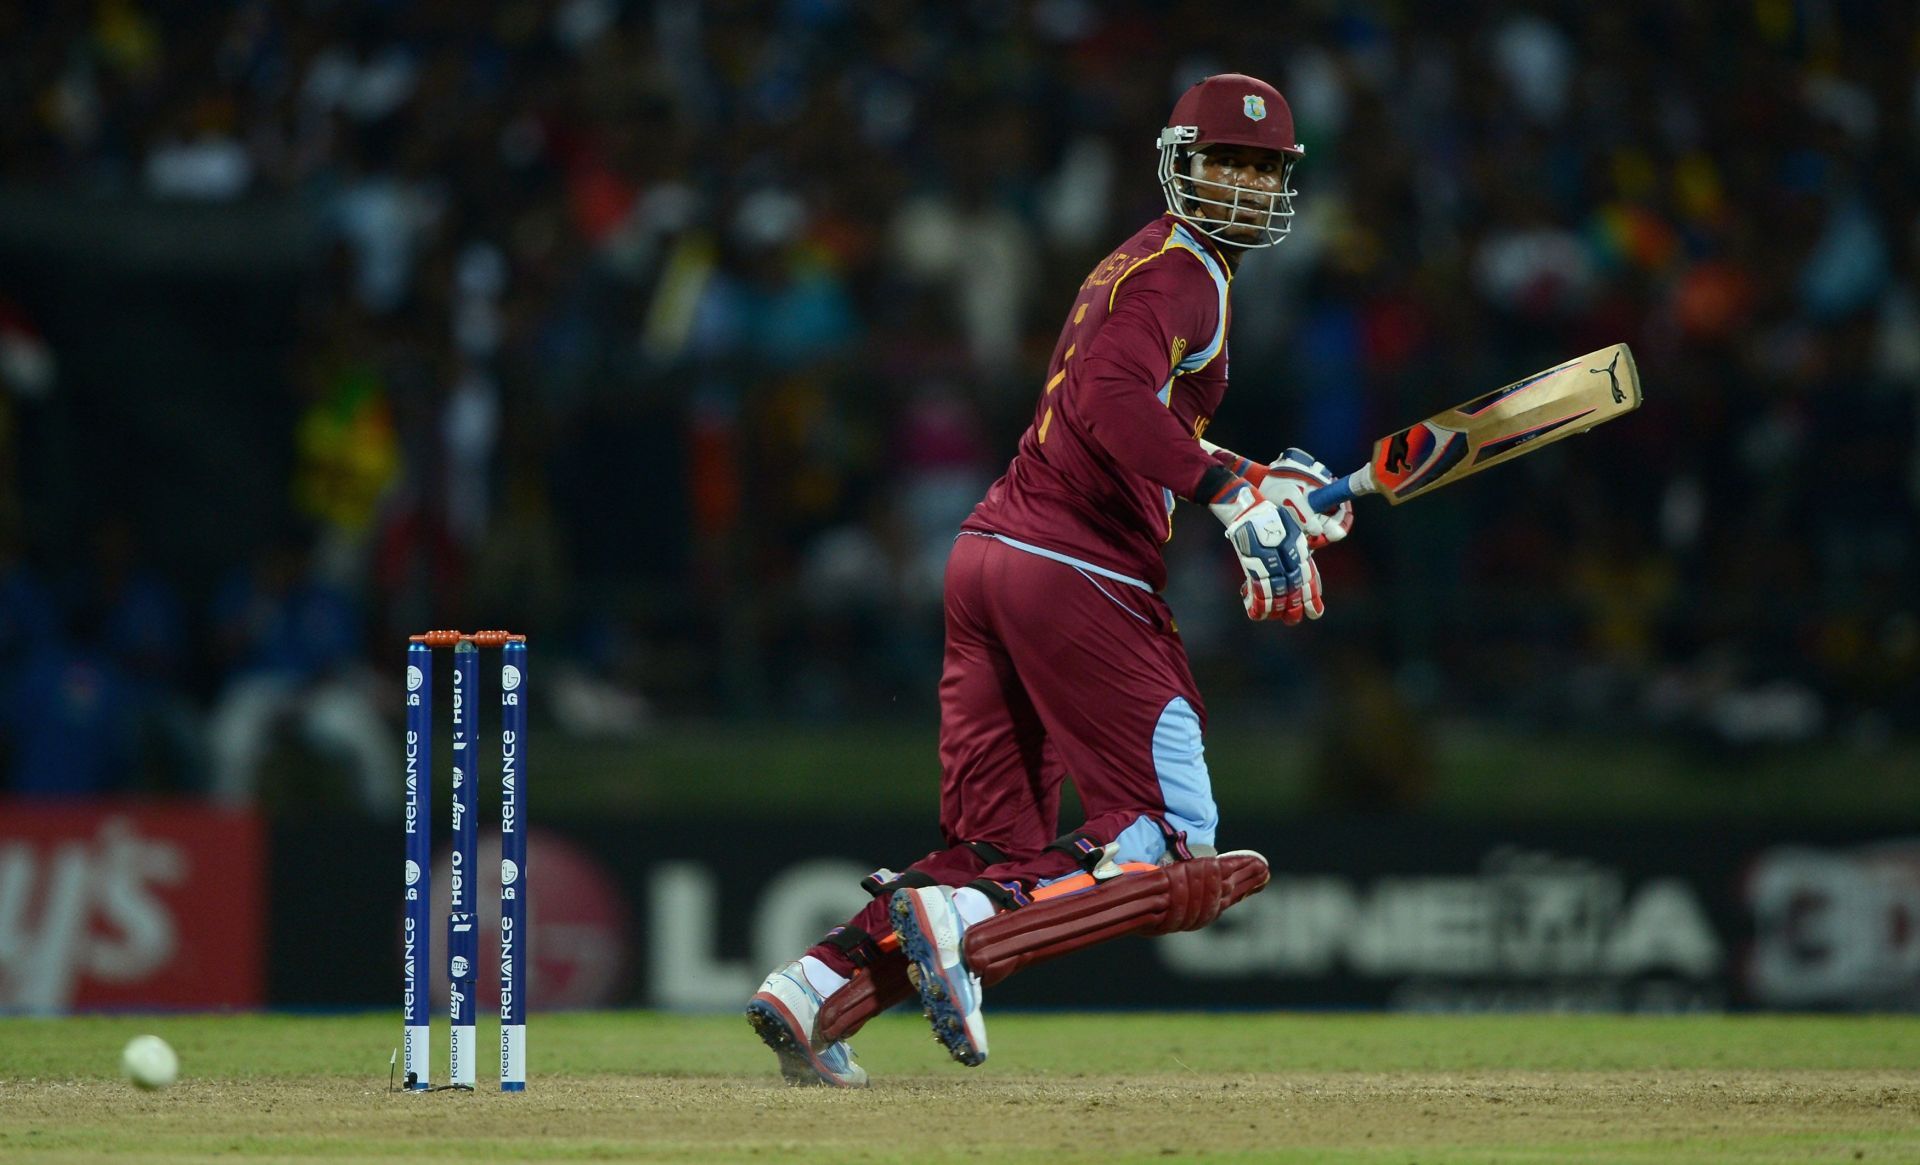 Samuels scored a magnificent half-century against Sri Lanka in the 2012 T20 World Cup final.